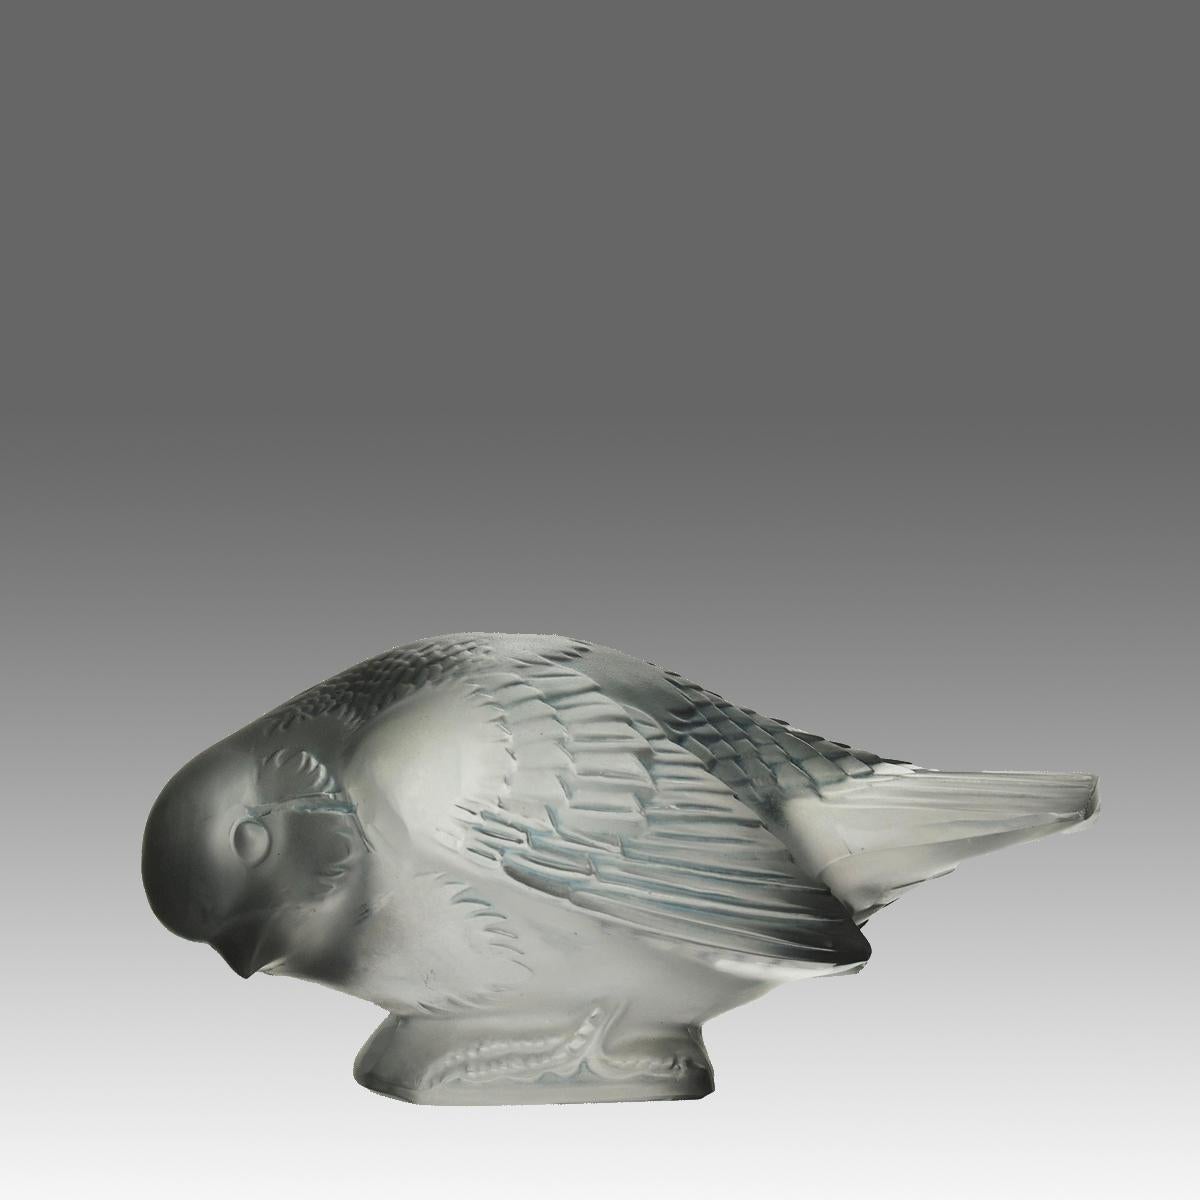 An endearing Art Deco clear glass study of a feeding sparrow with excellent hand finished surface detail, signed R.Lalique.

